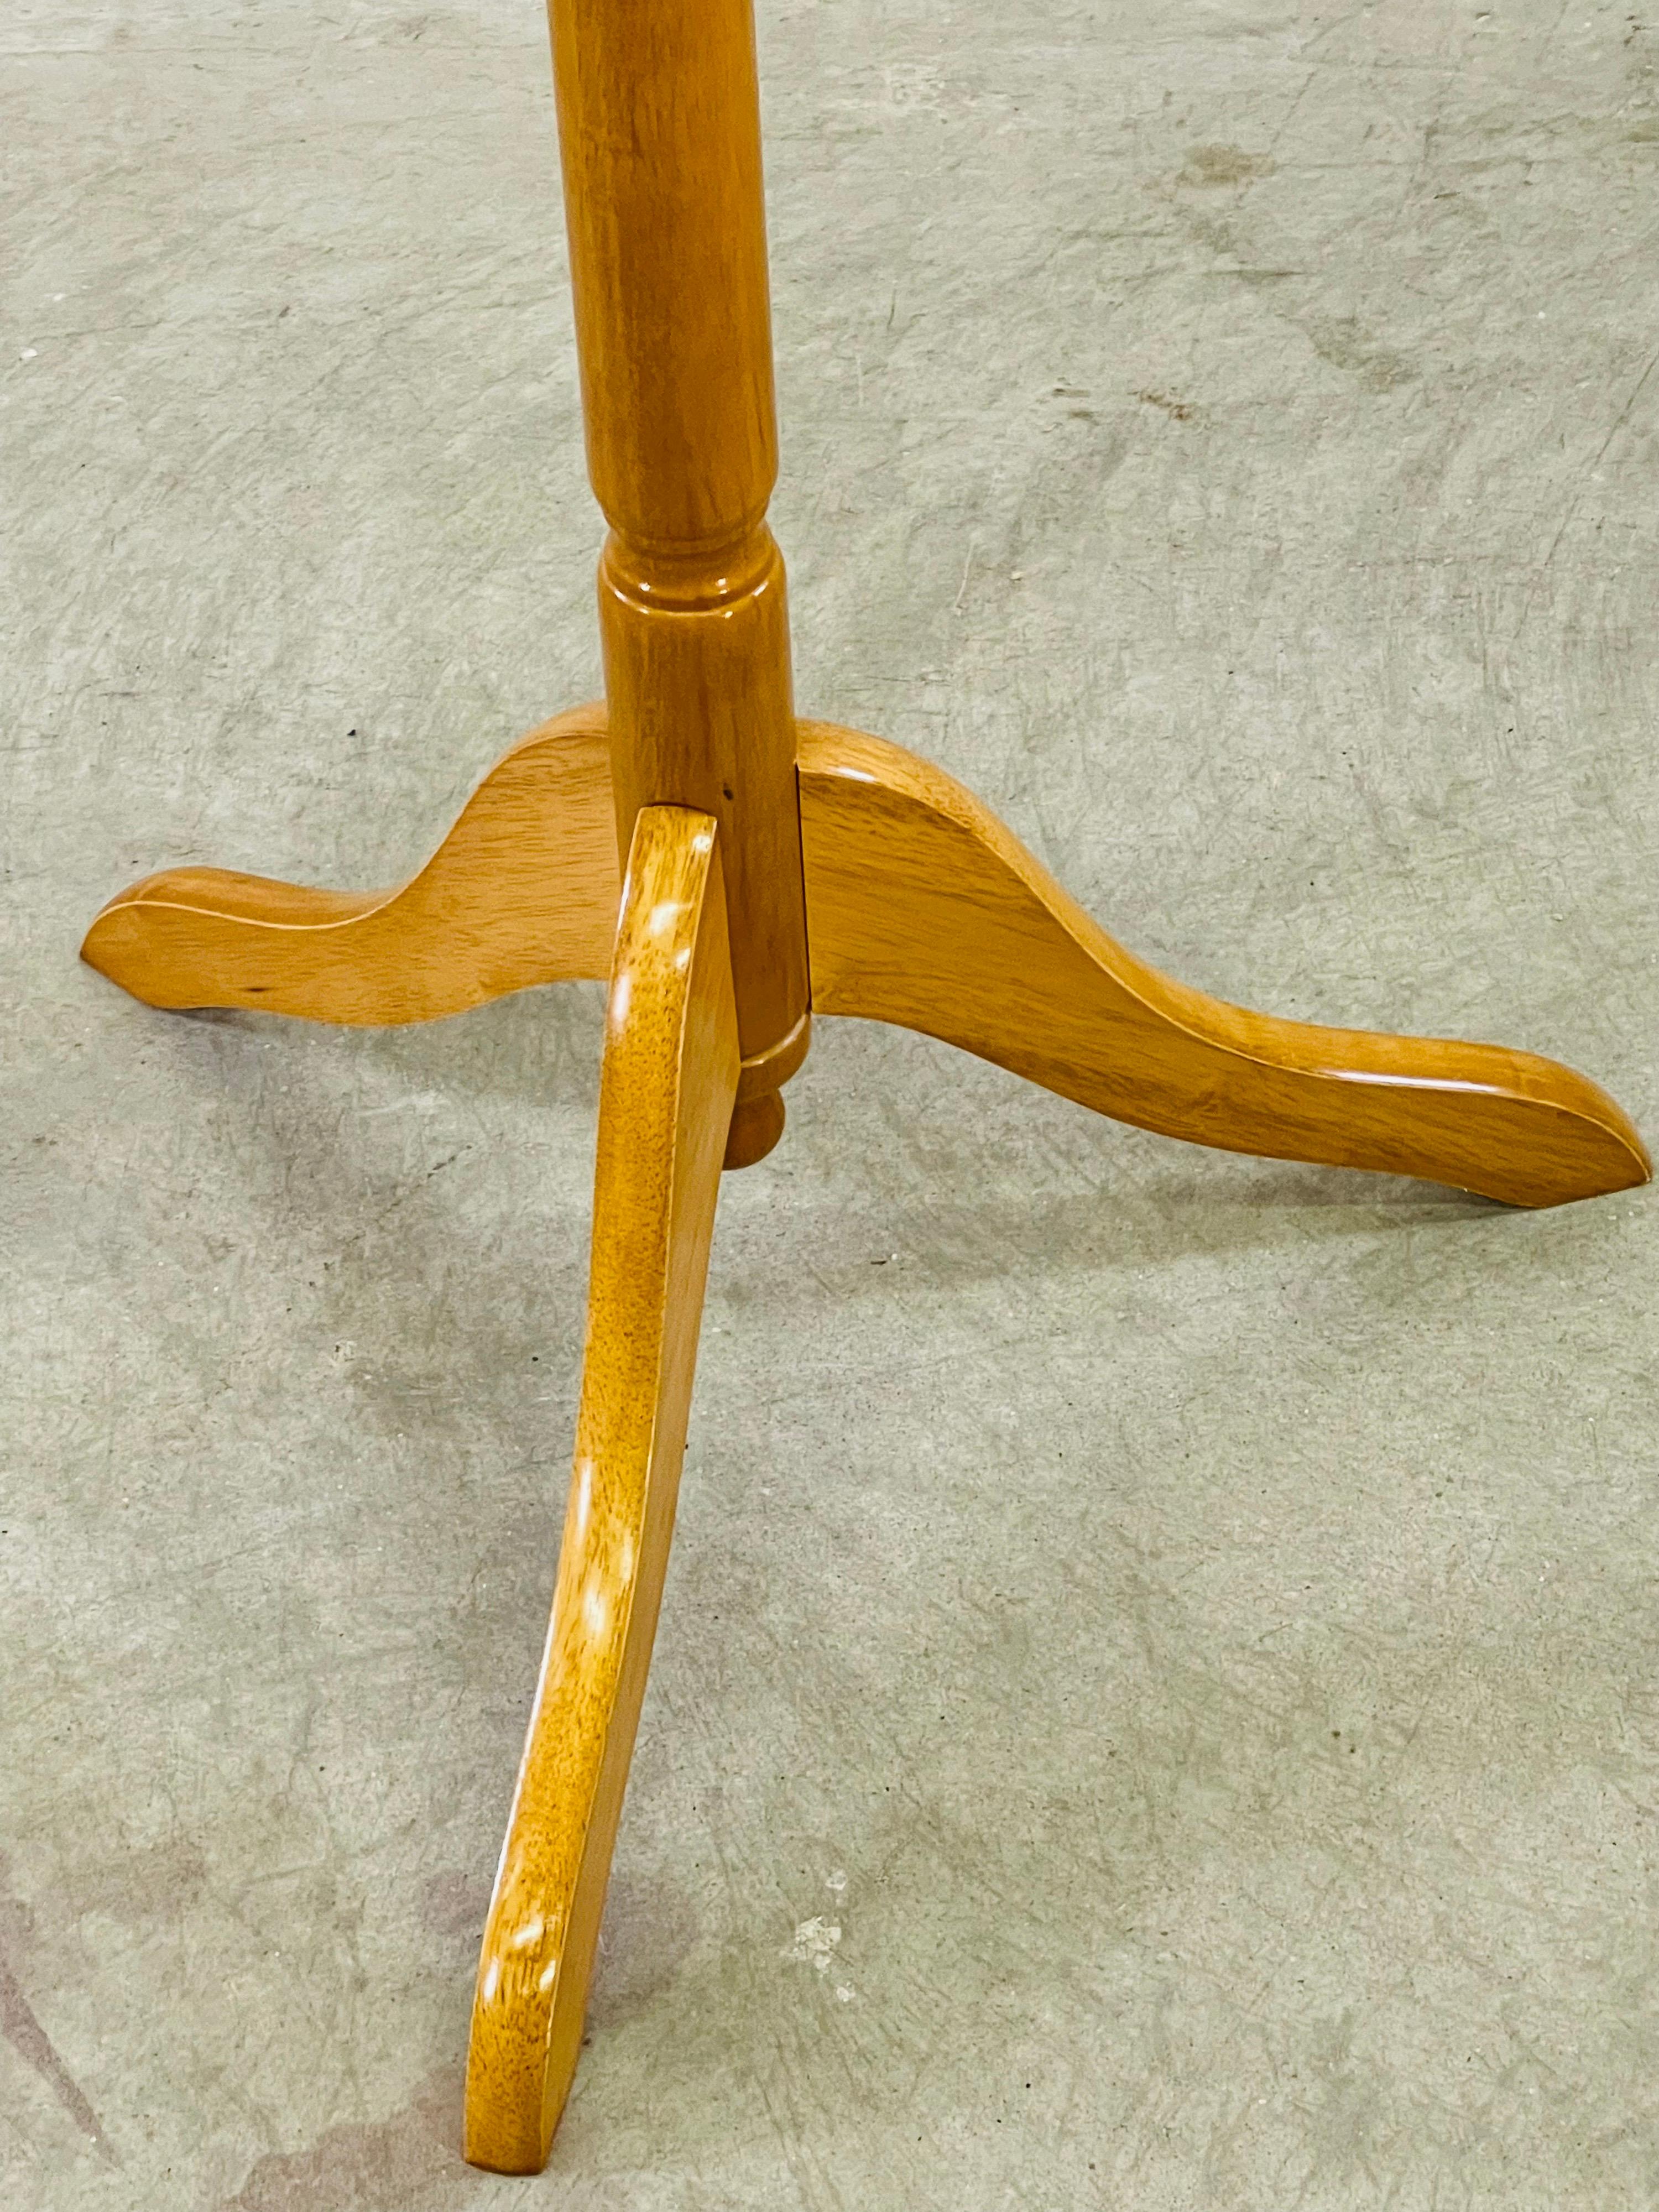 Vintage 1970s maple wood tall coat rack. The top of the rack spins and the base is a tripod style. No marks.